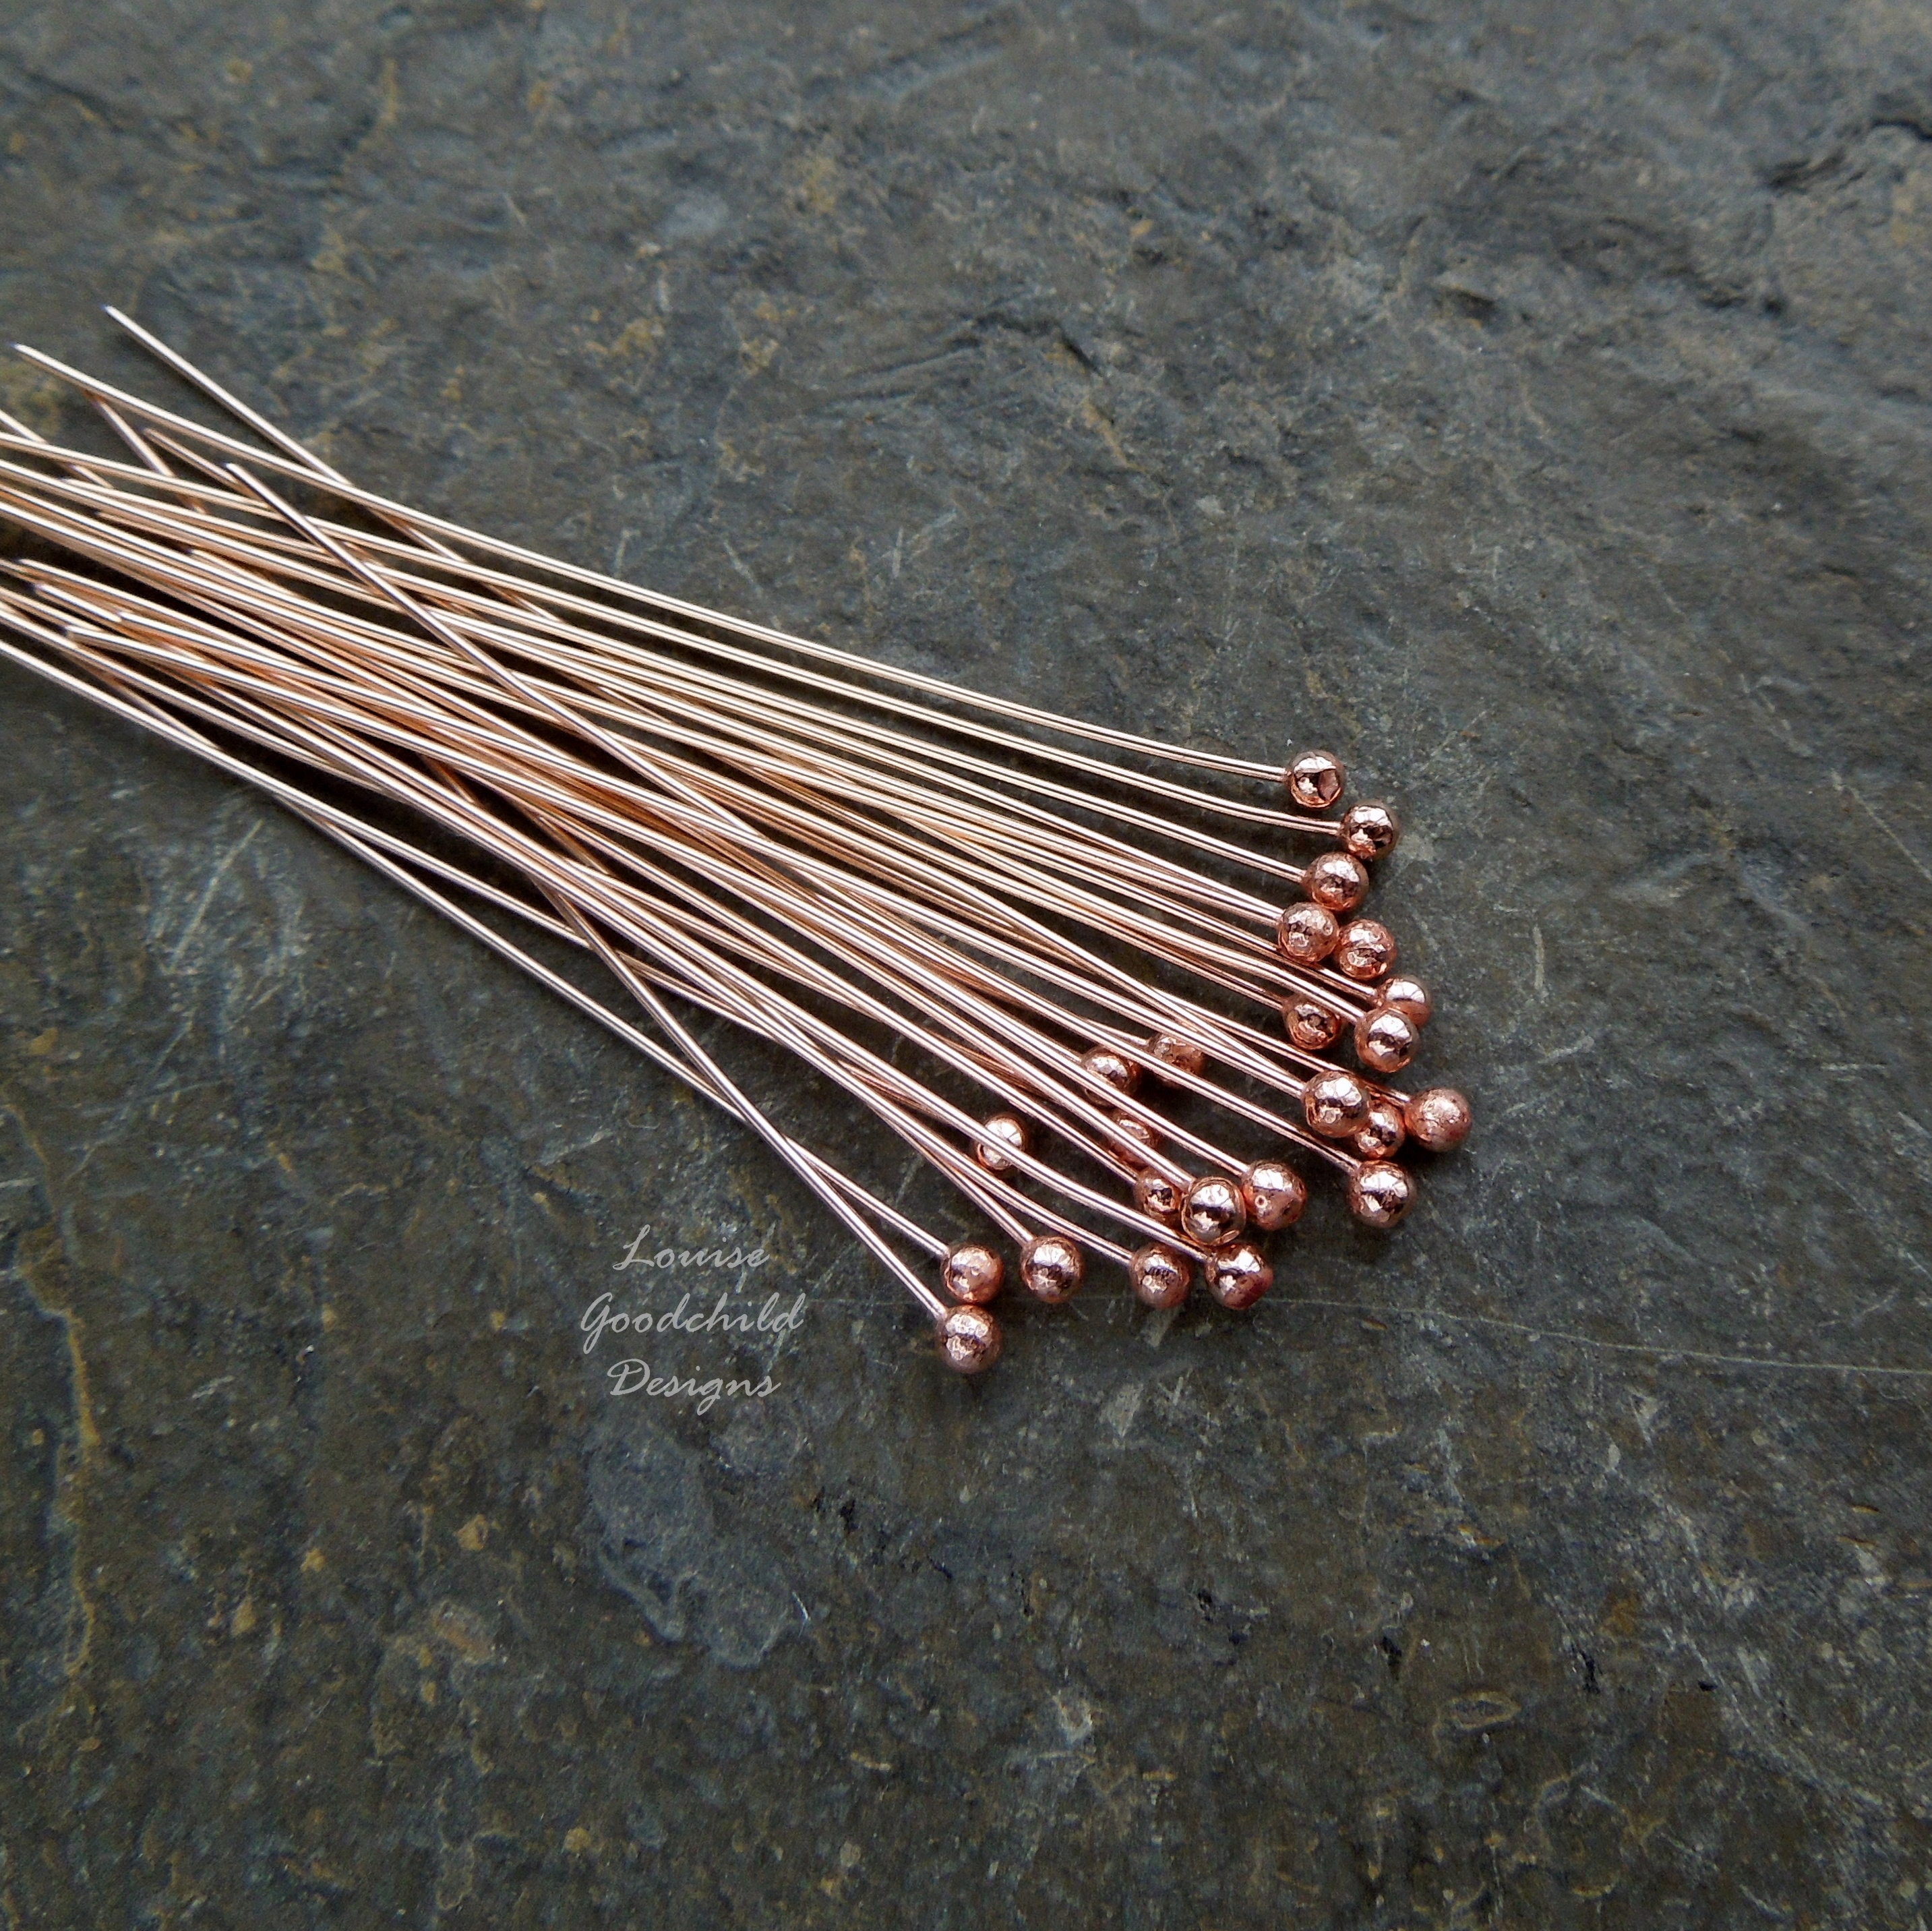 300pcs Head Pins for Jewelry Making, Eyepins, Plated Gold Ballpin for  Earrings, Headpins 